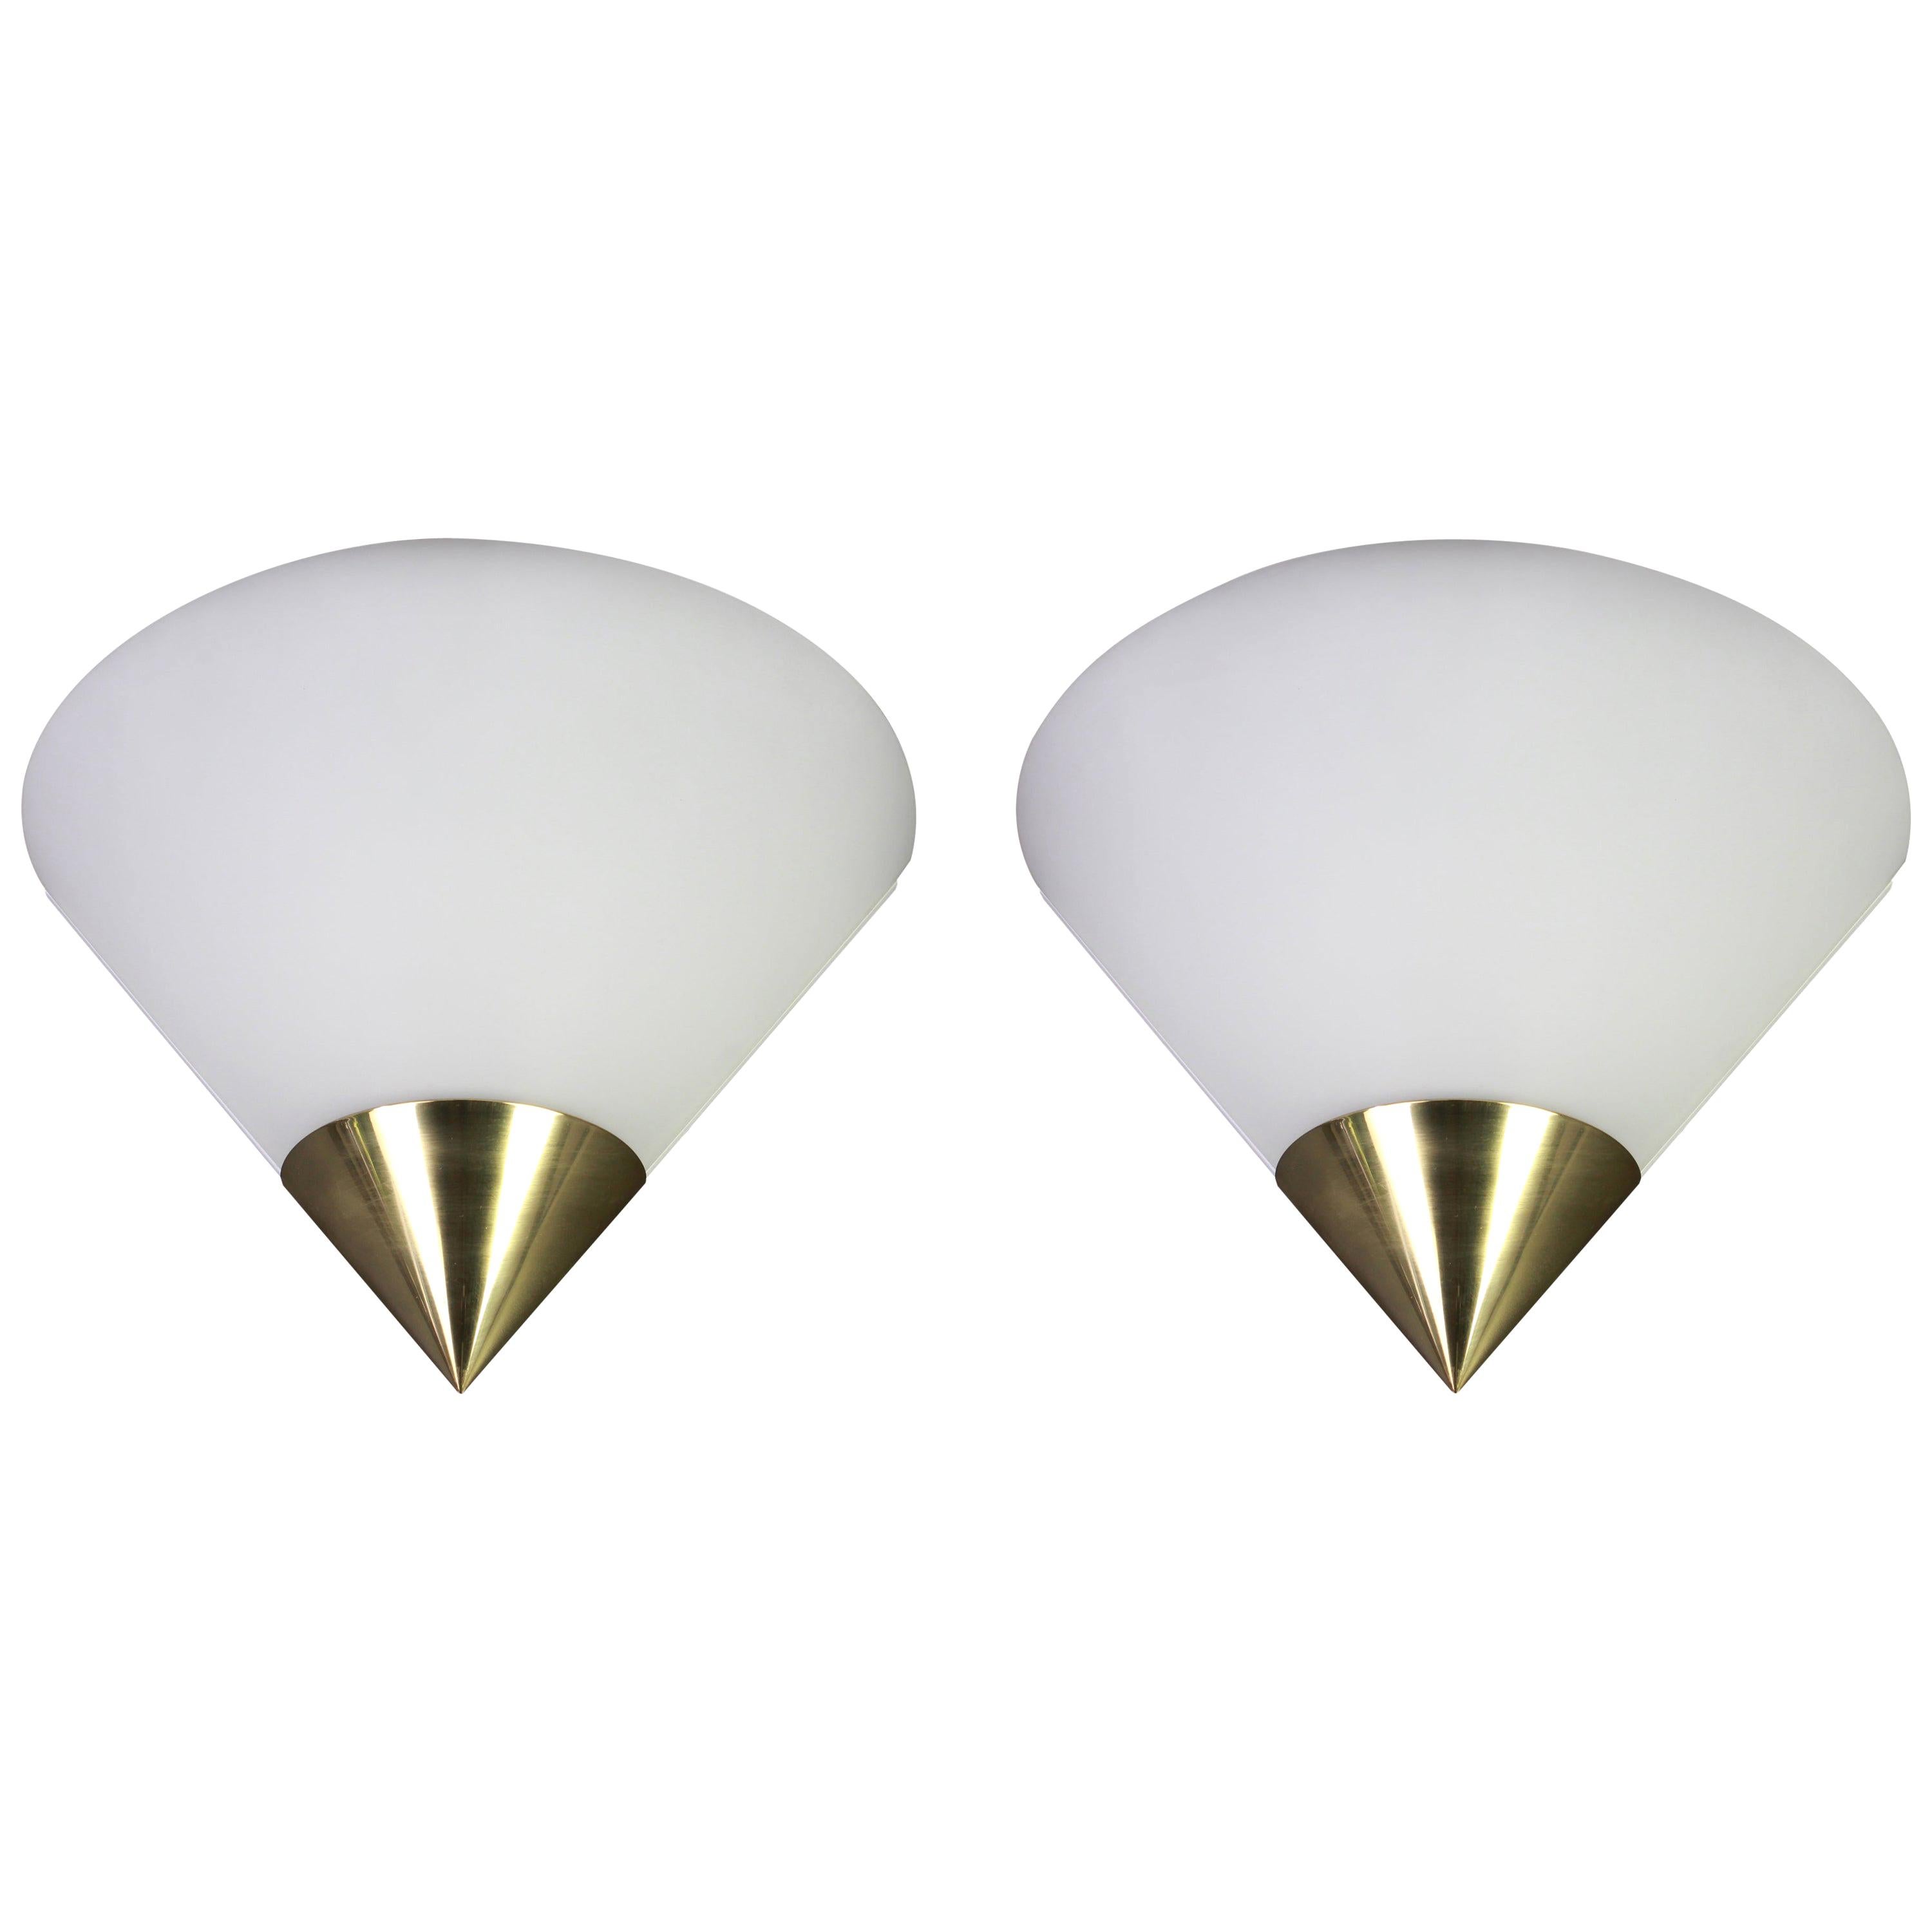 Pair of Opal Glass Sconces Designed by Limburg, Germany